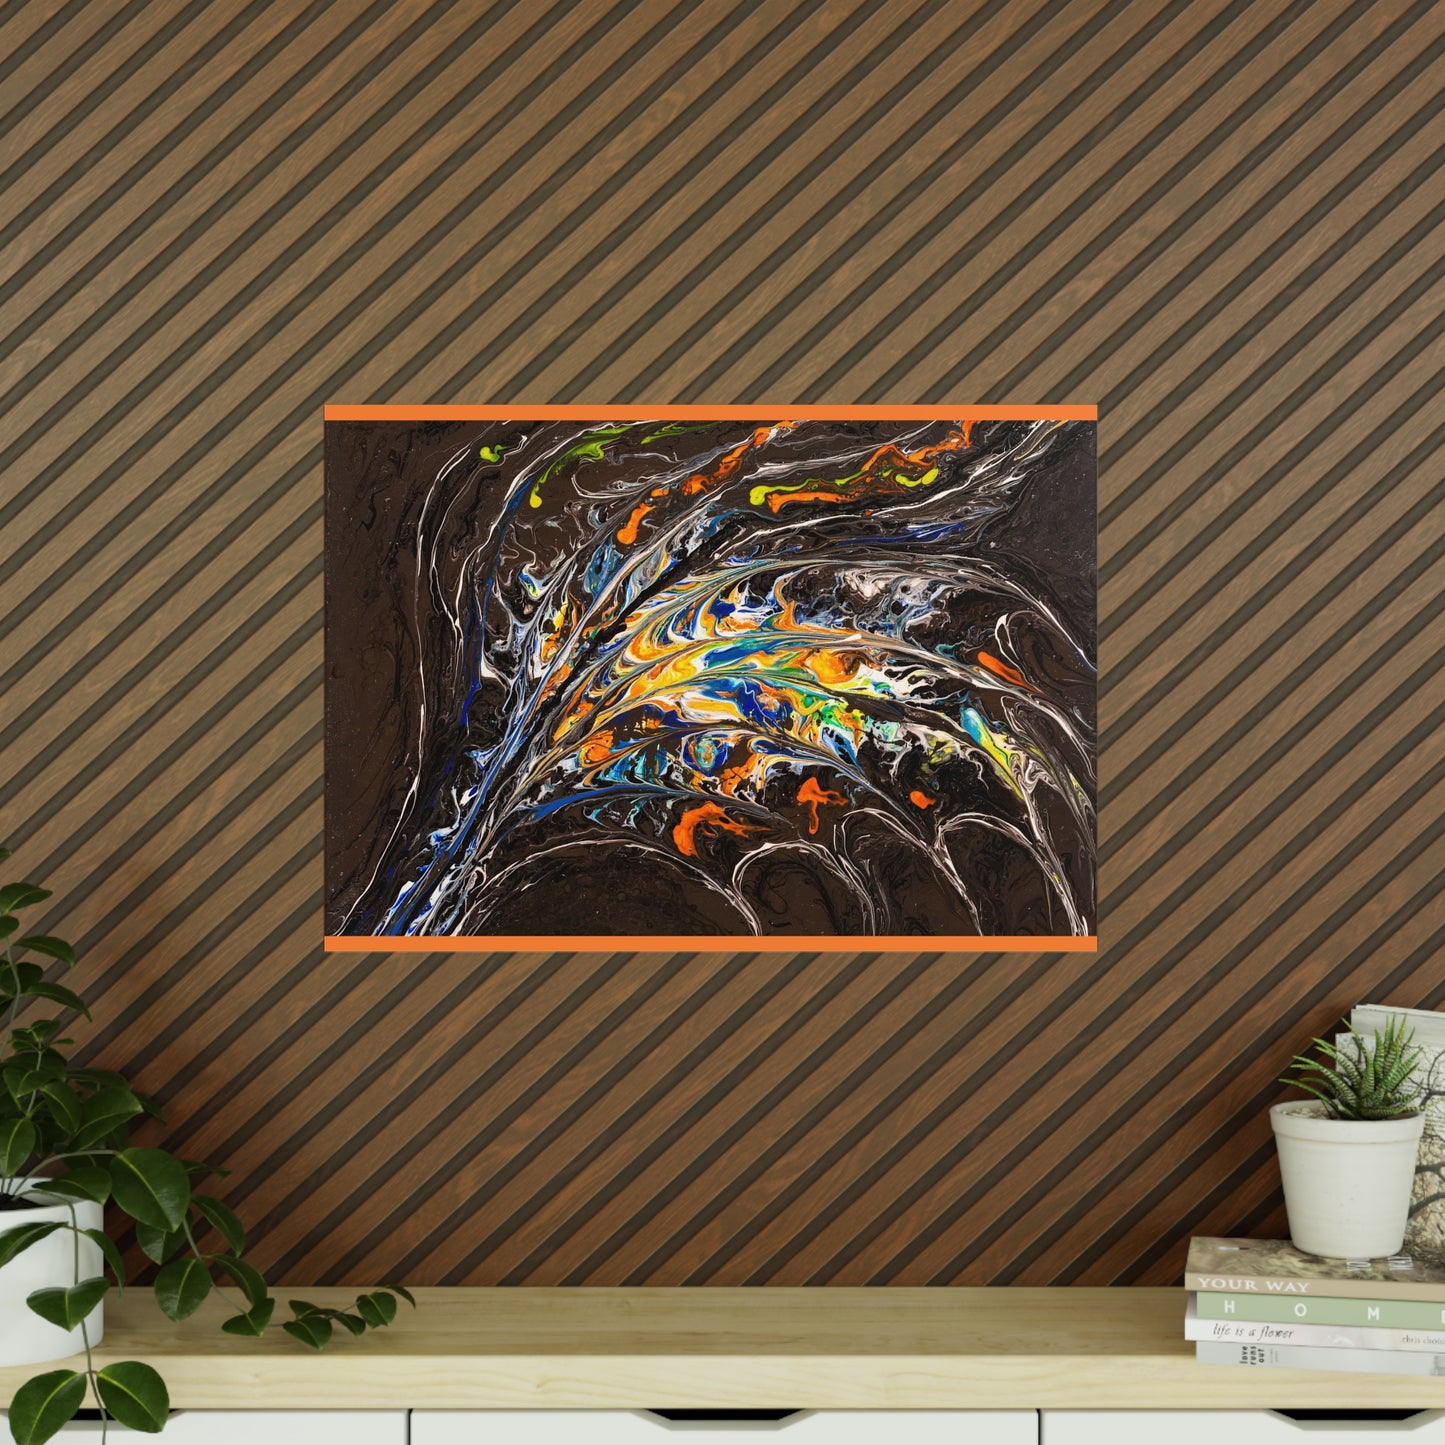 Abyss Photopaper Posters 